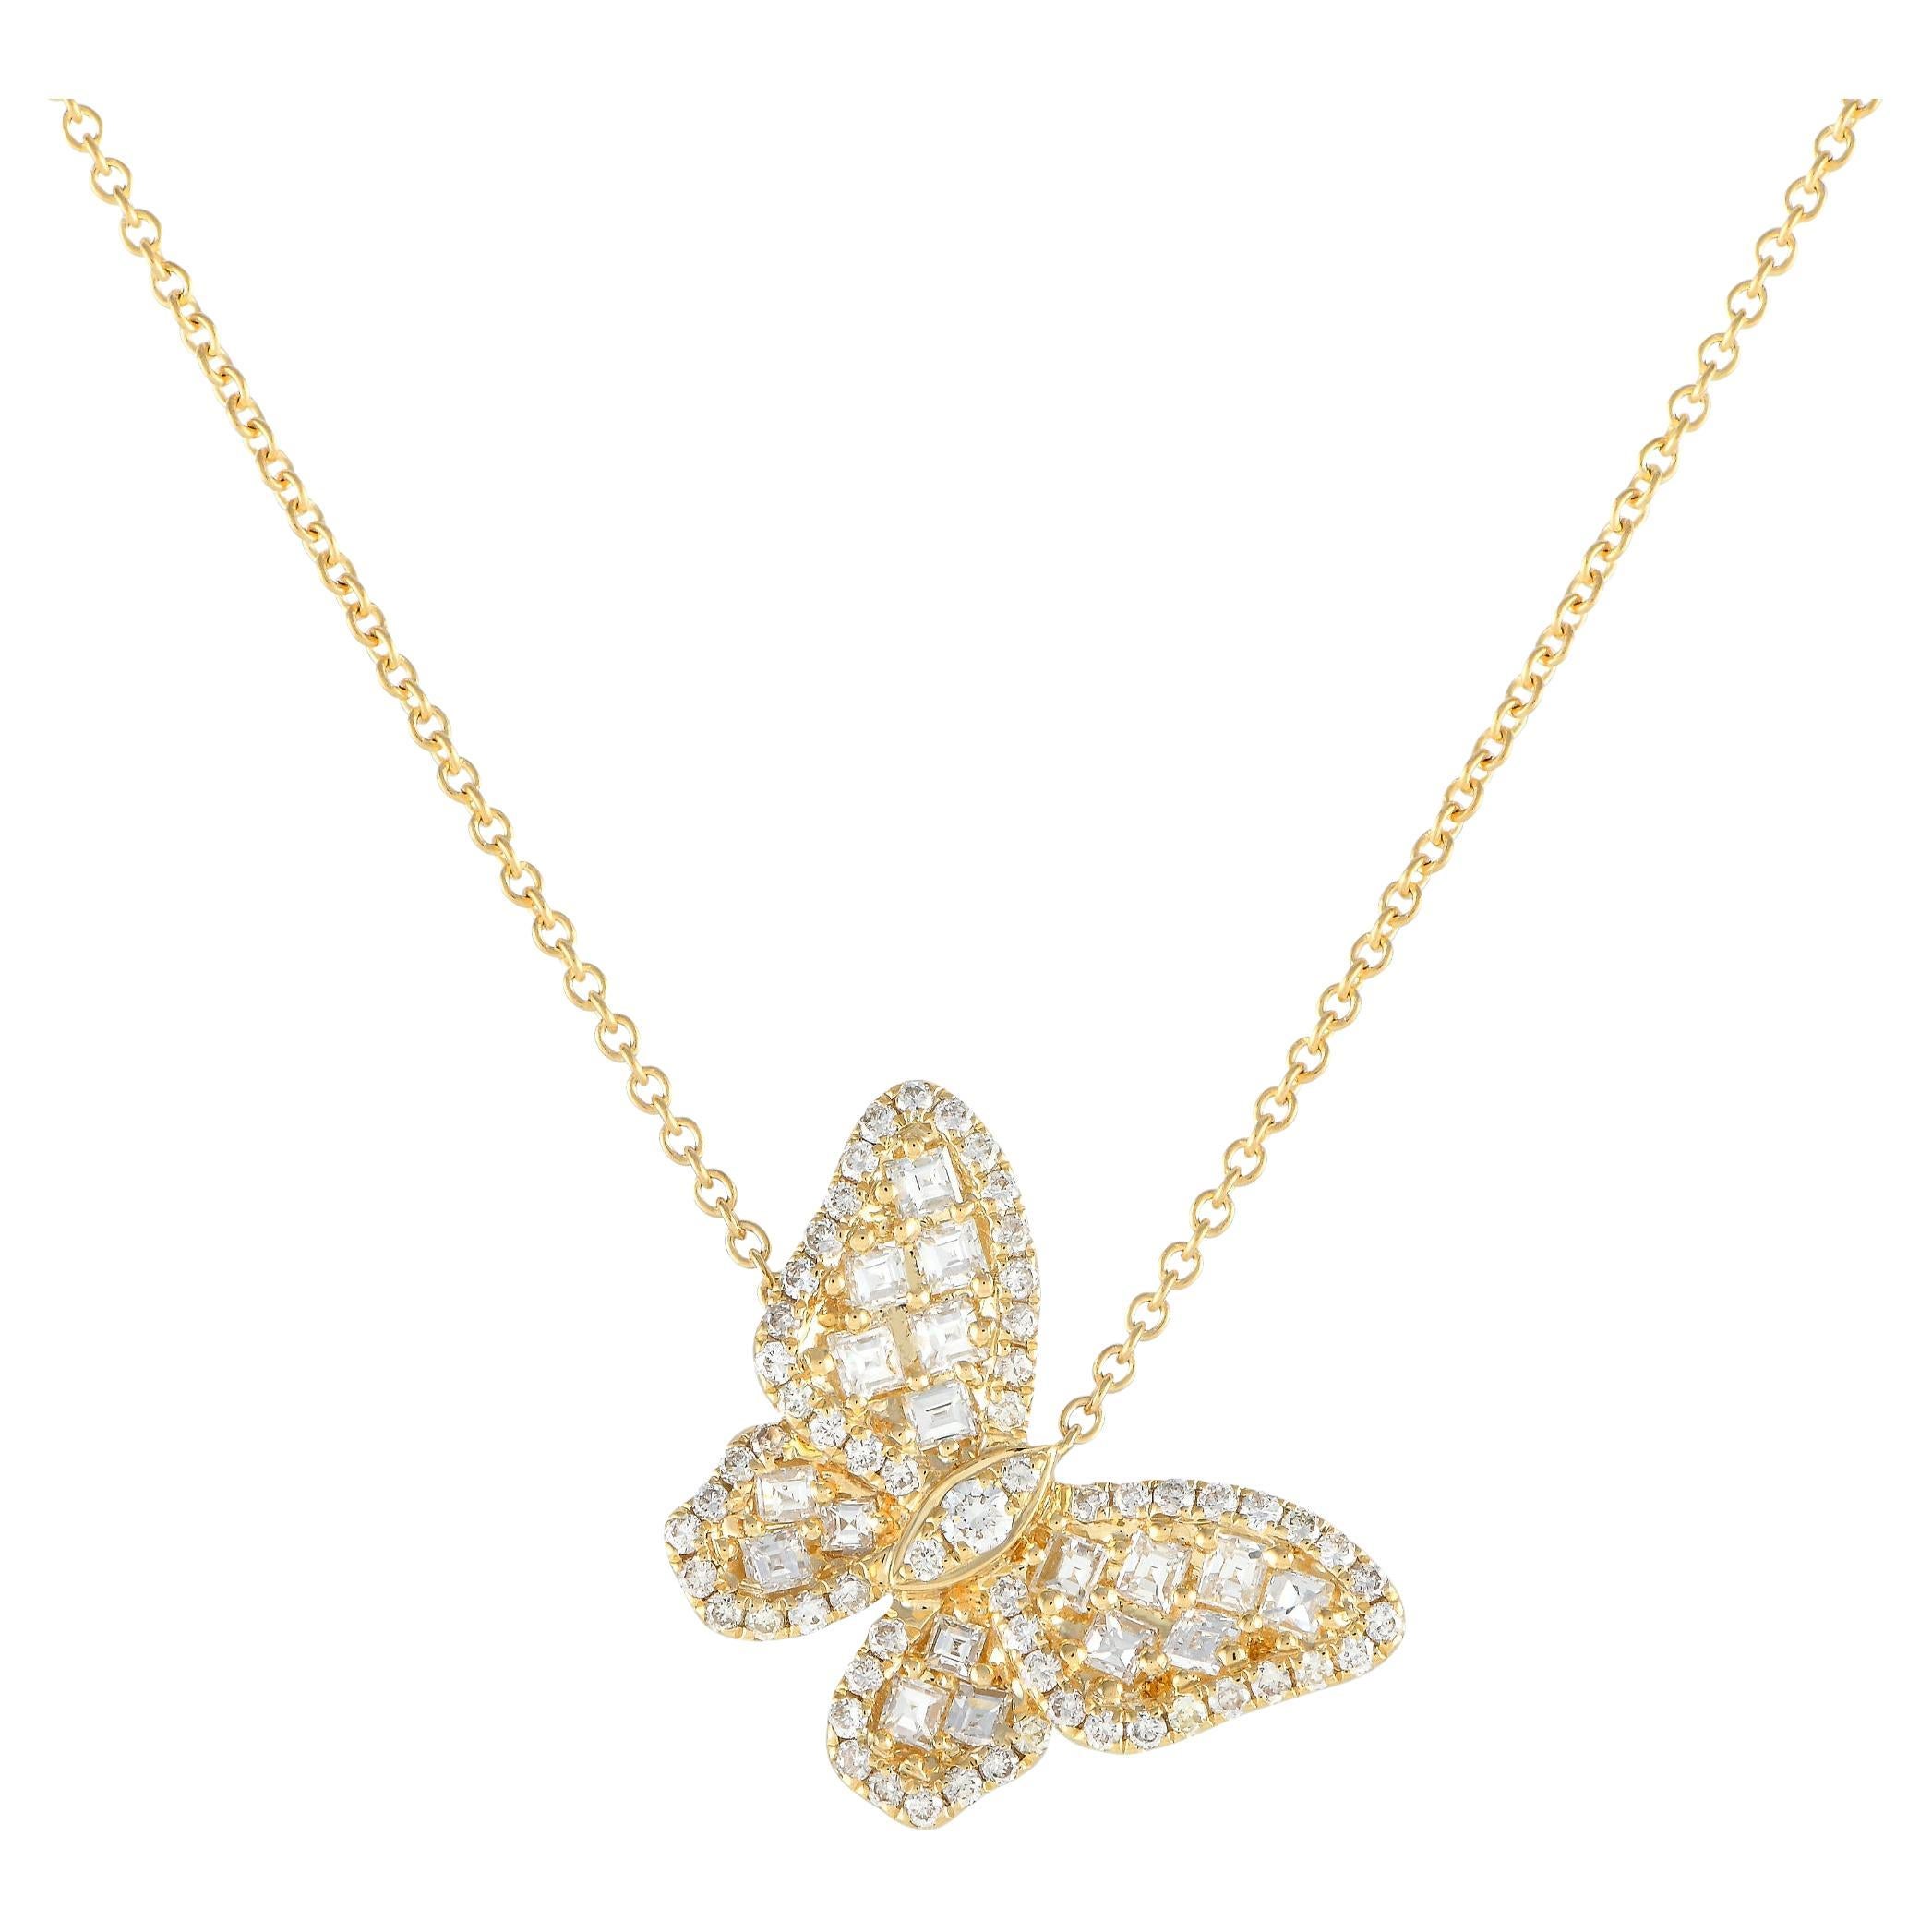 LB Exclusive 18K Yellow Gold 0.90ct Diamond Butterfly Necklace